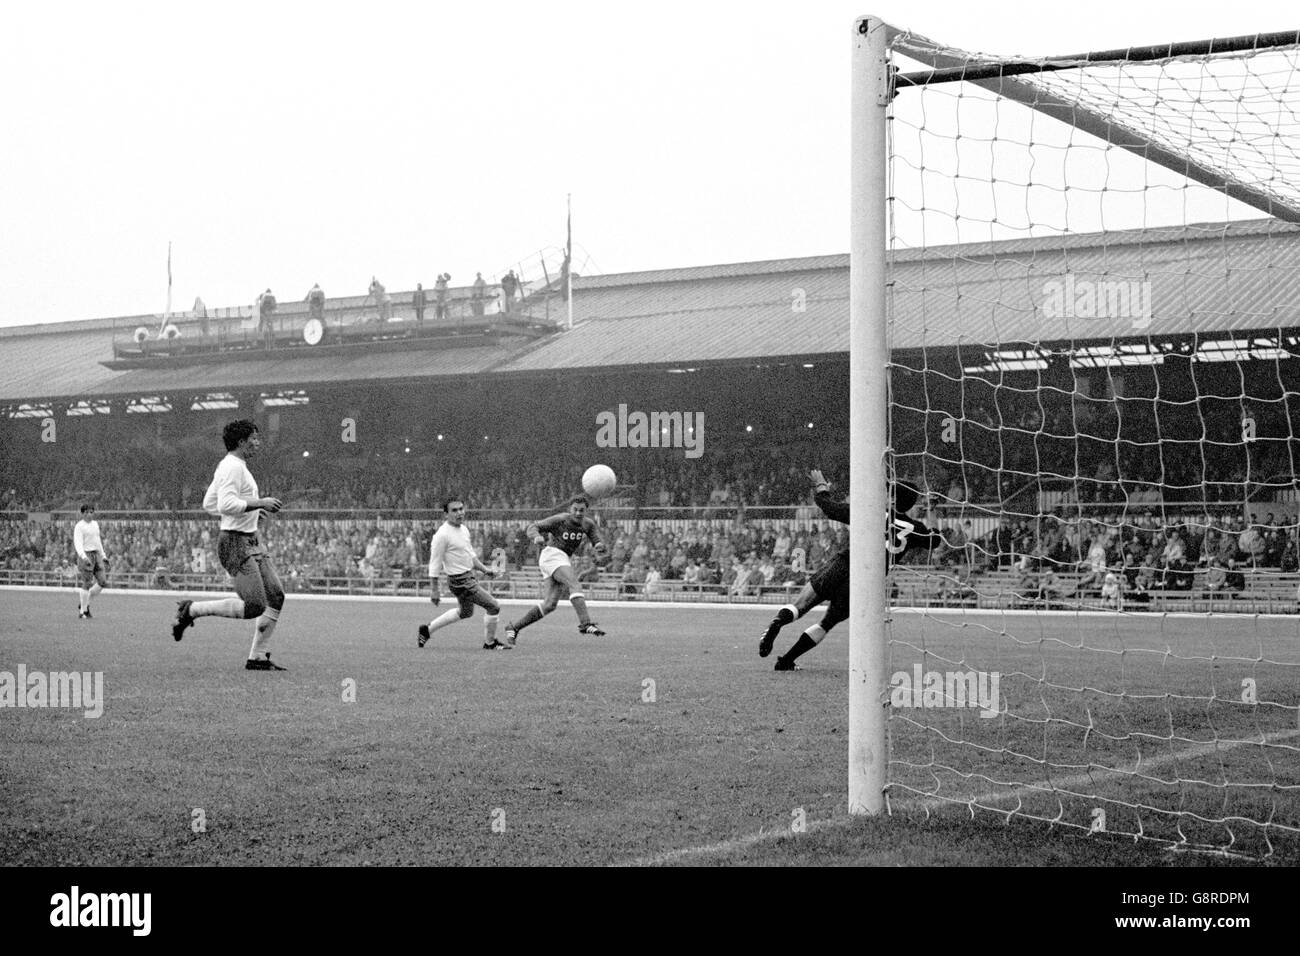 Soccer - World Cup England 1966 - Group Four - USSR v Chile - Roker Park. USSR's Valeriy Porkujan (second r) fires the ball past Chile goalkeeper Juan Olivares (r) to score the opening goal Stock Photo